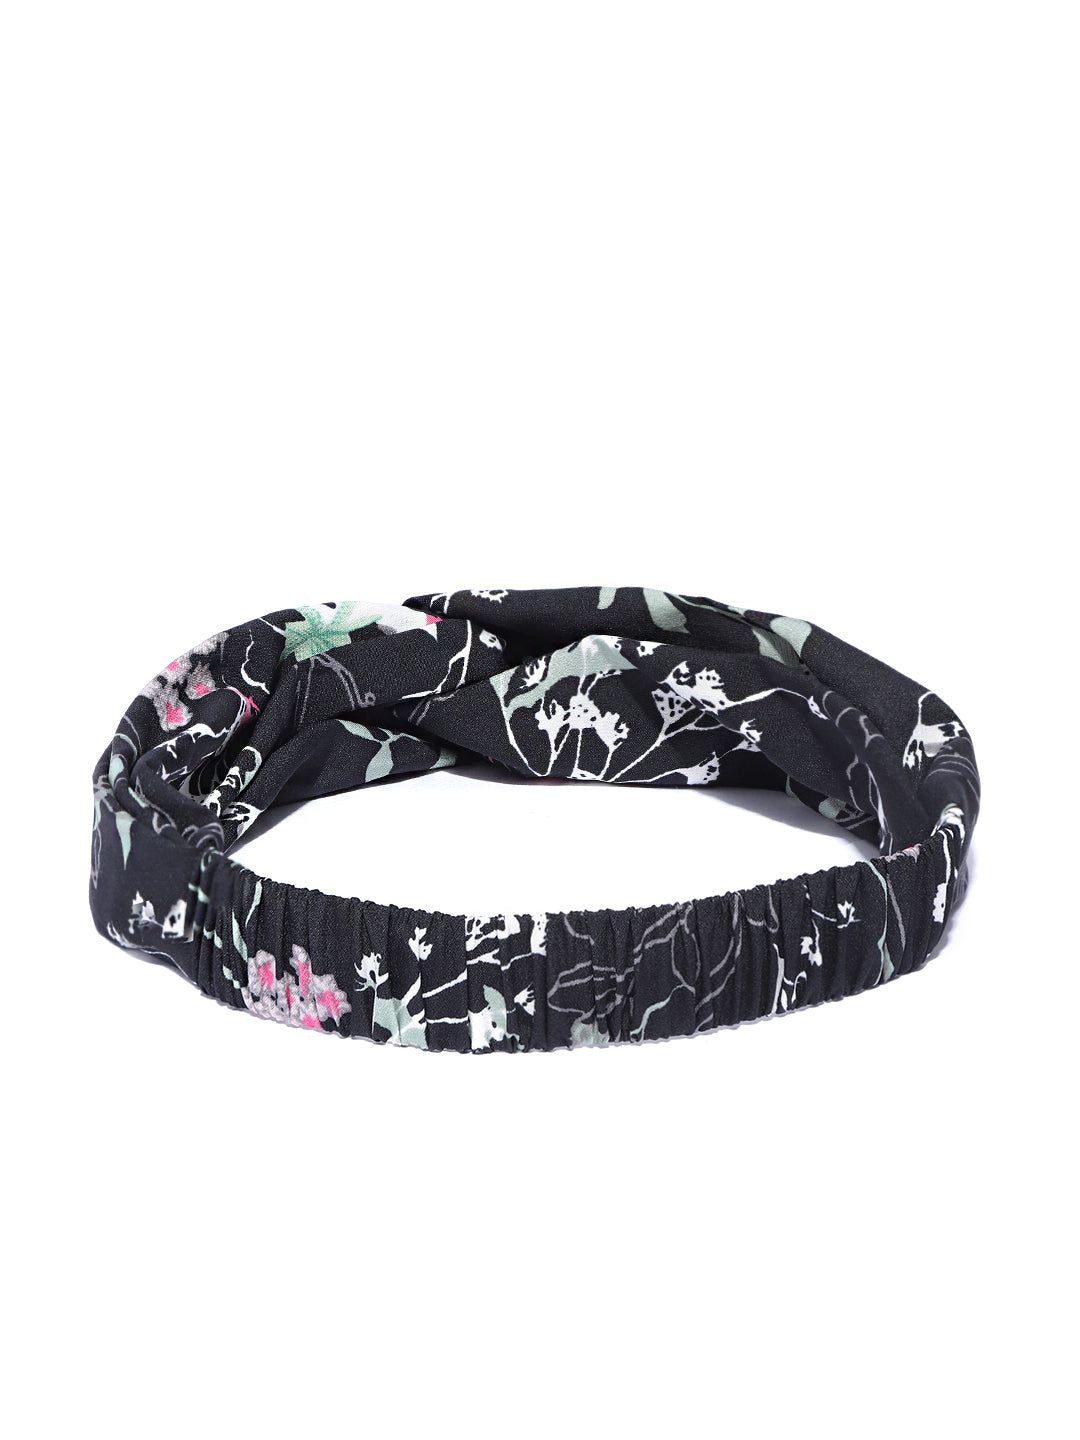 Blueberry multi floral printed black knot hairband